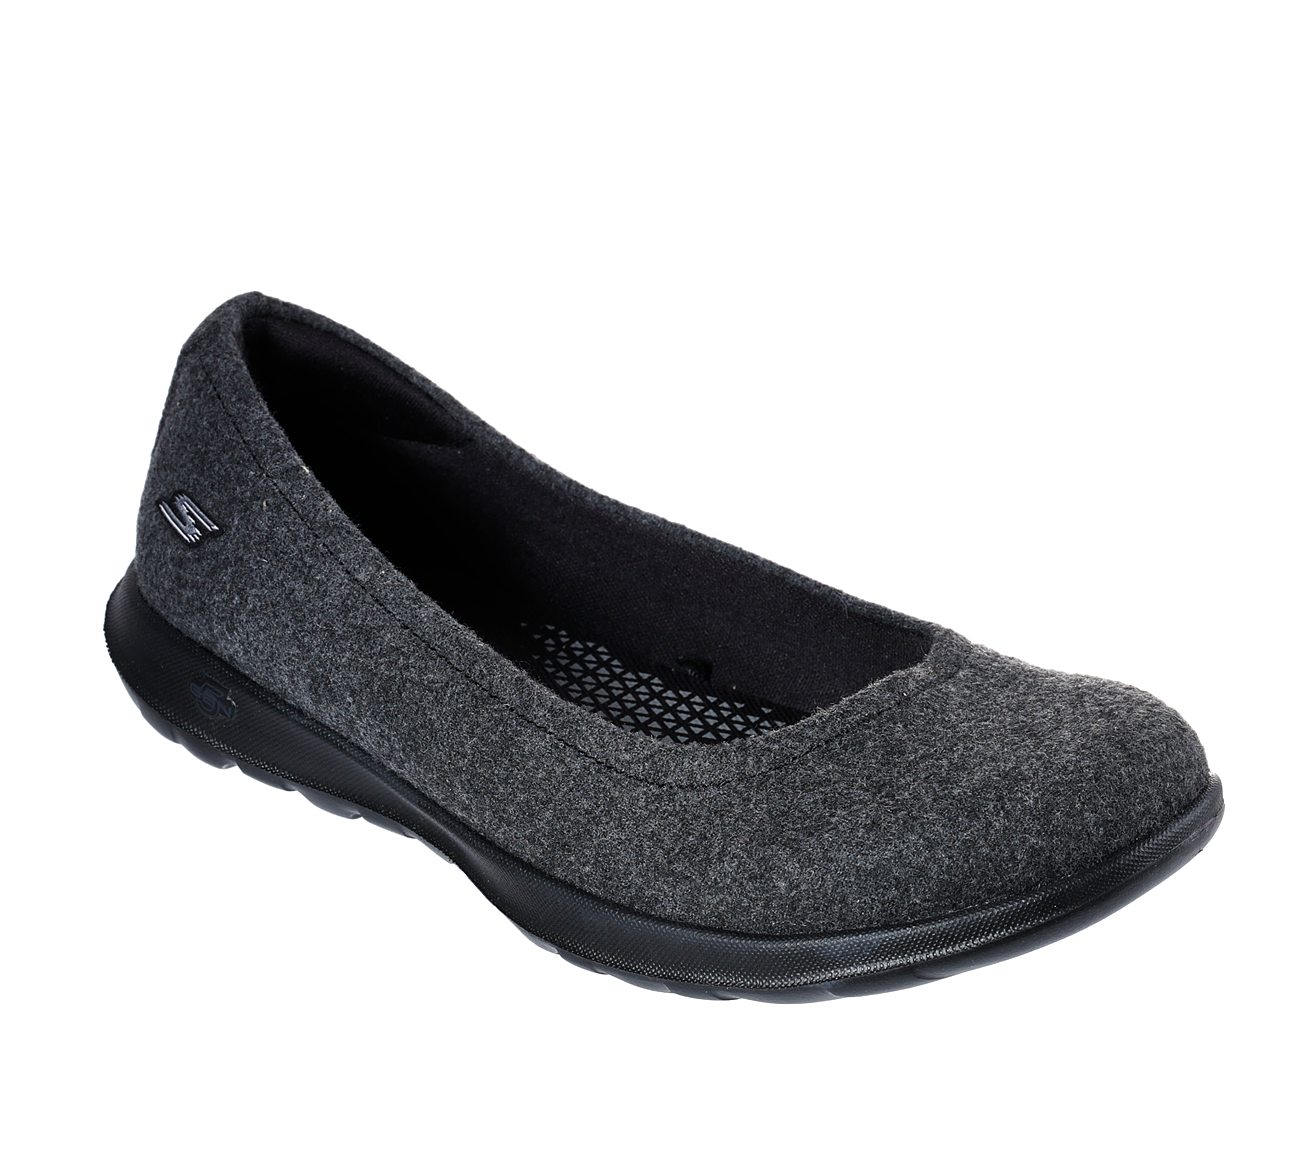 sketchers dolly shoes